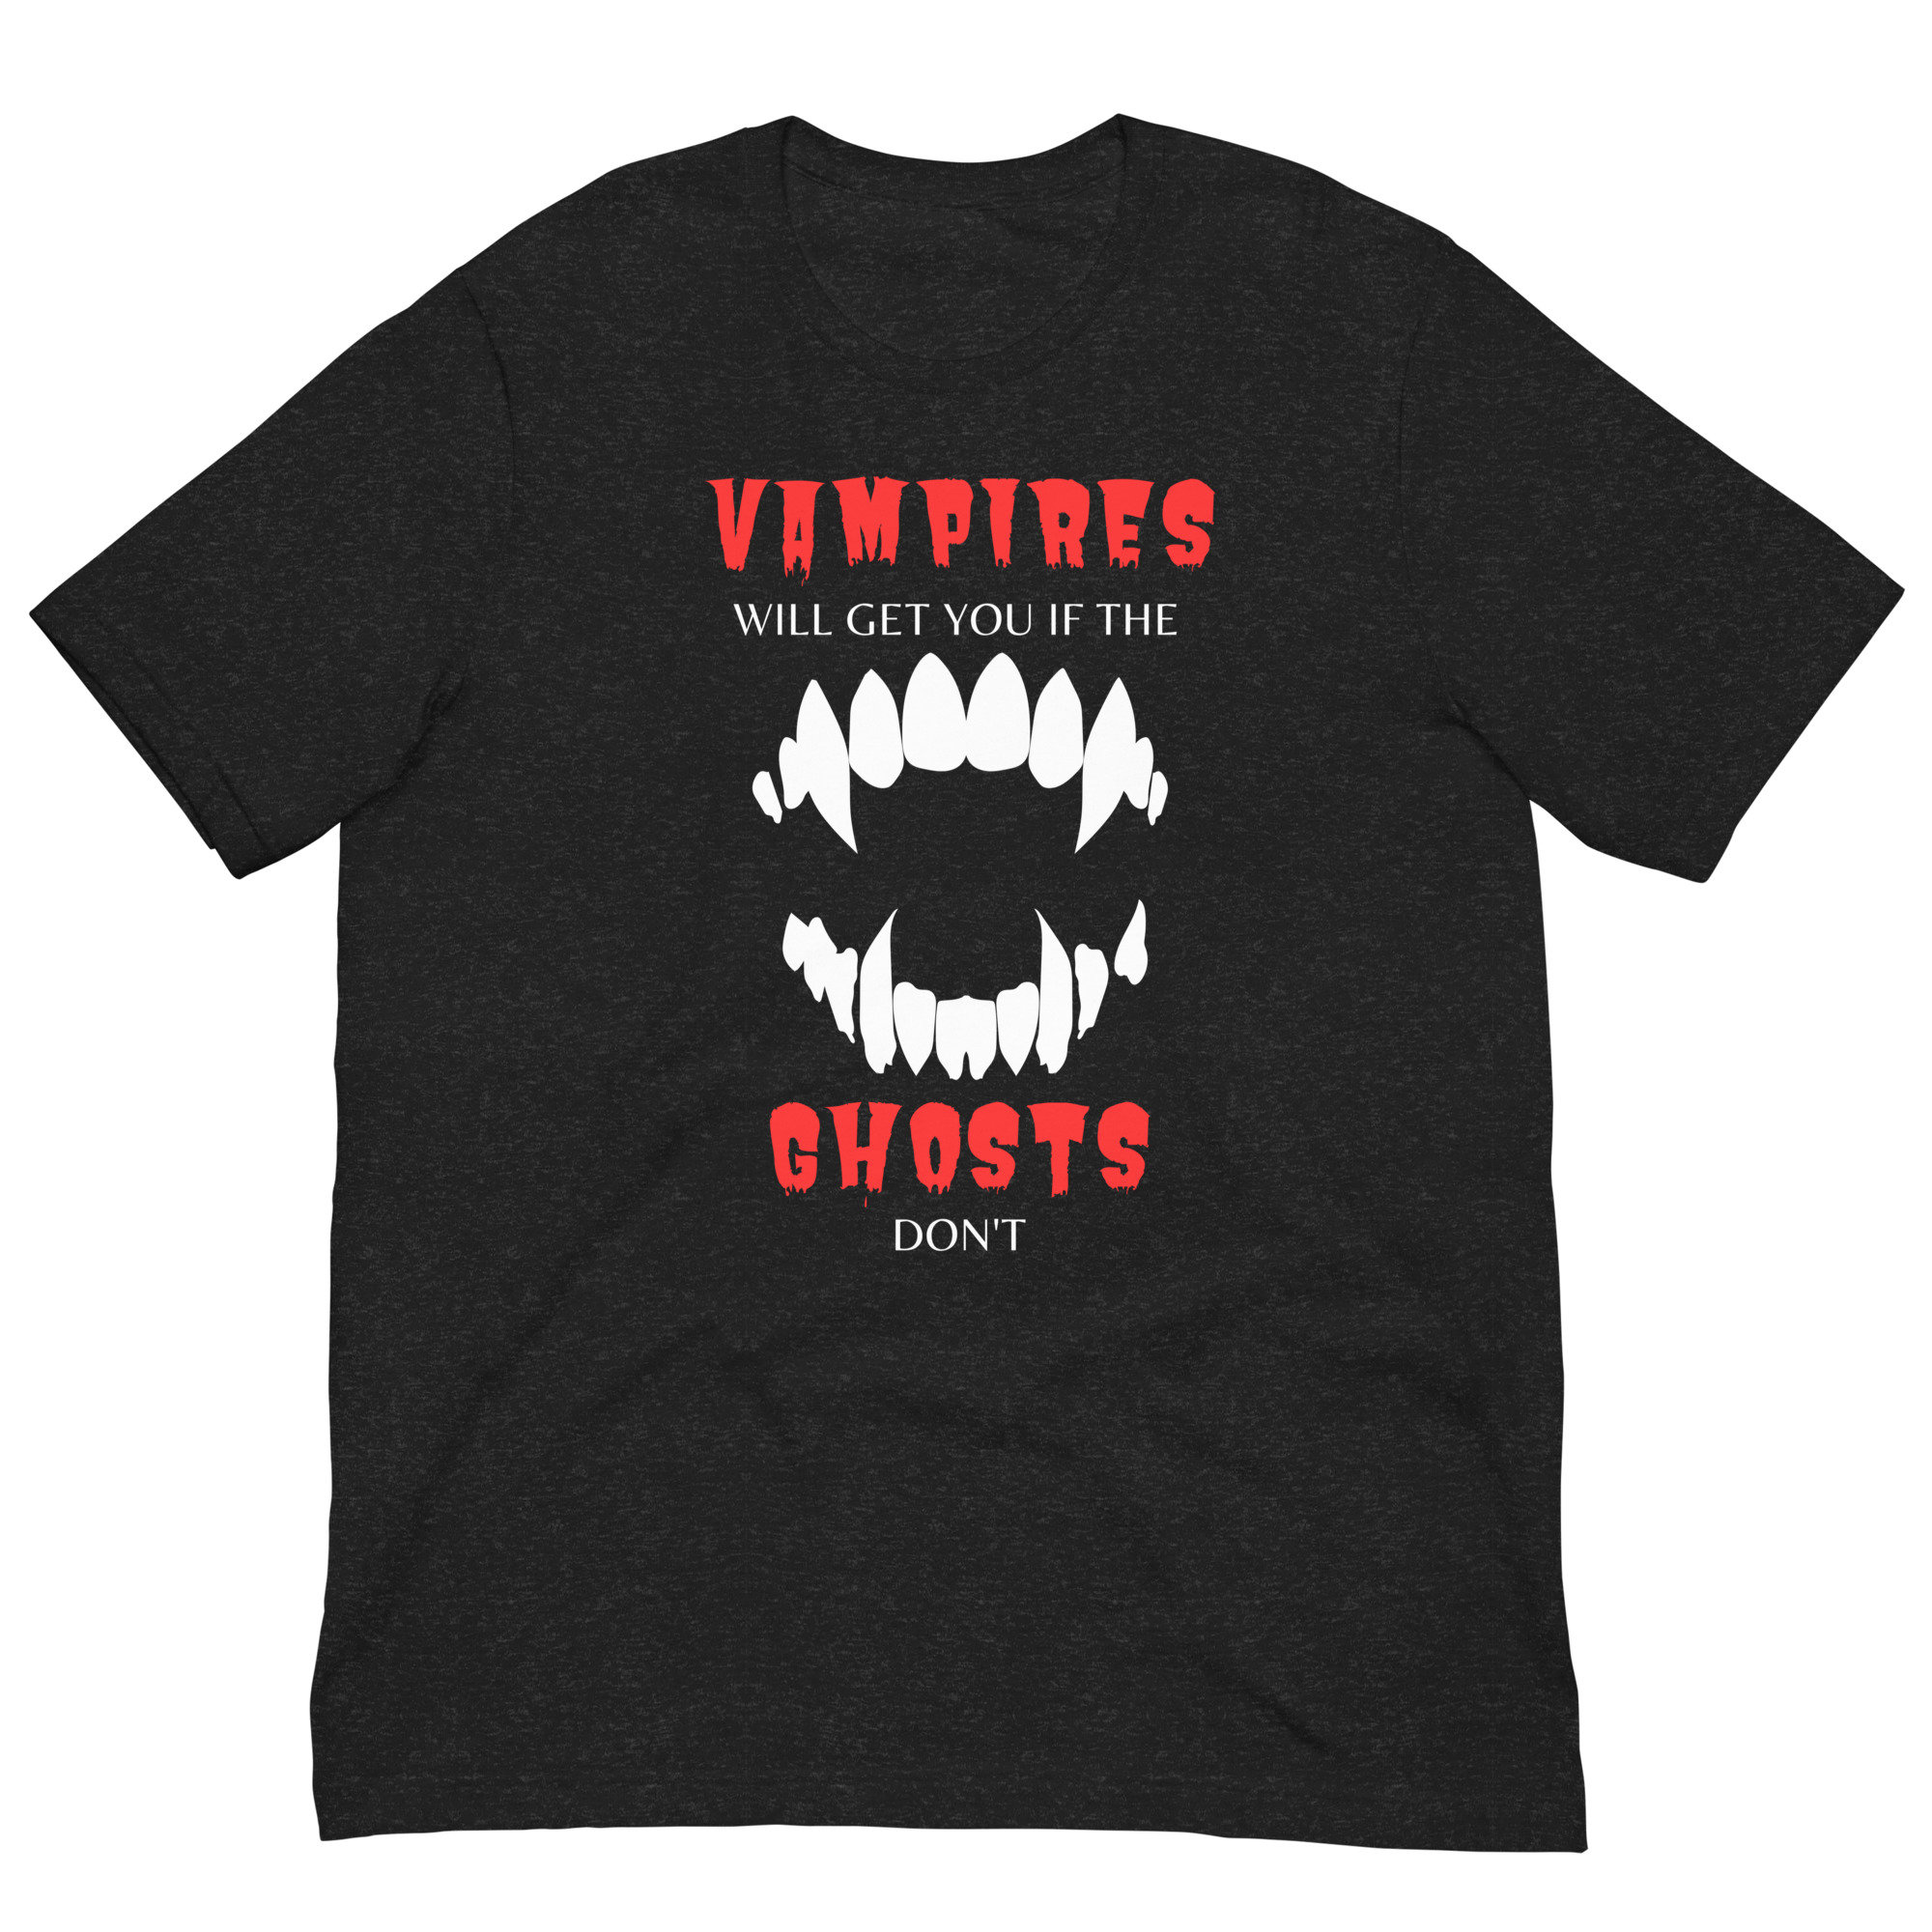 Discover Vampires will get you if ghosts don't T-shirt